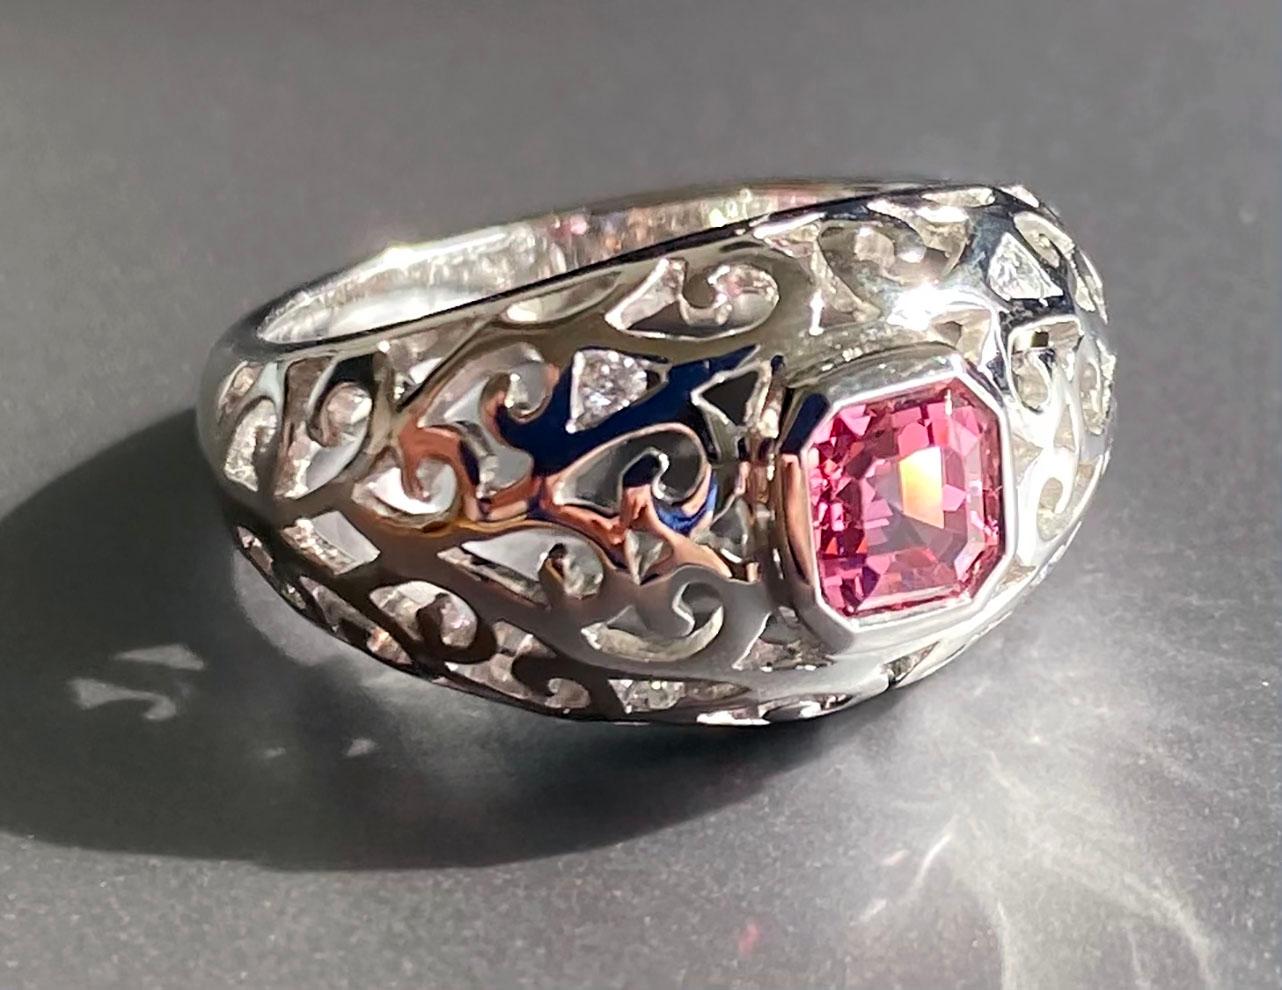 14kt White Gold Pinky Ring set with 0.09 Carats - 4 accent Diamonds & a 0.82 Carat octagon cut Pink Spinel. The ring is a size 7.

Originally from San Diego, California, Kary Adam lived in the “Gem Capital of the World” - Bangkok, Thailand, sourcing